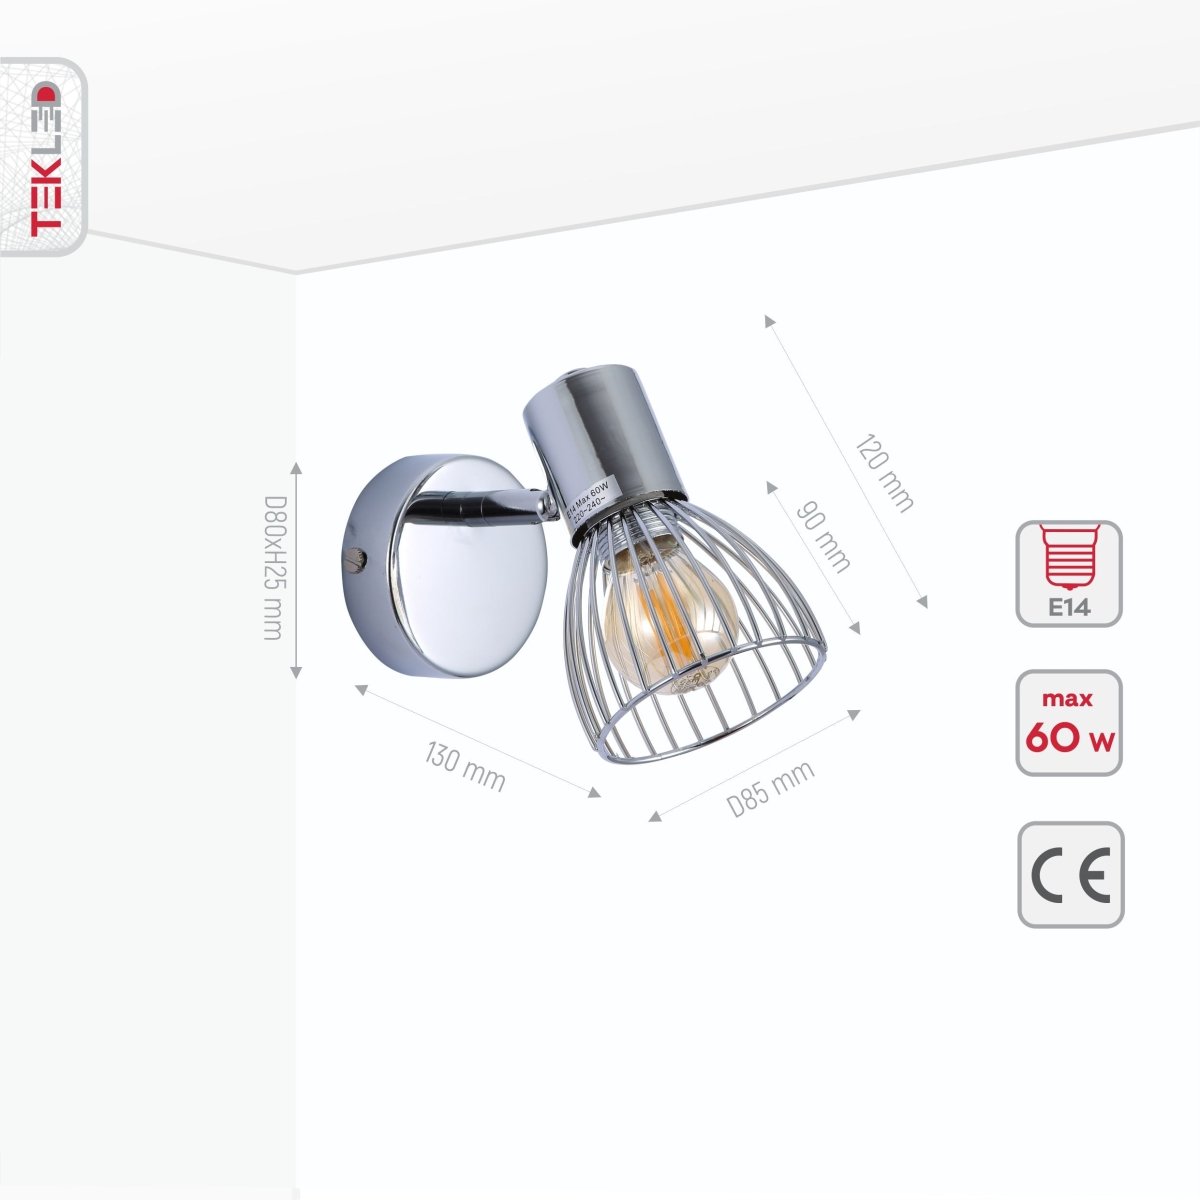 Product dimensions of chrome metal caged wall light e14